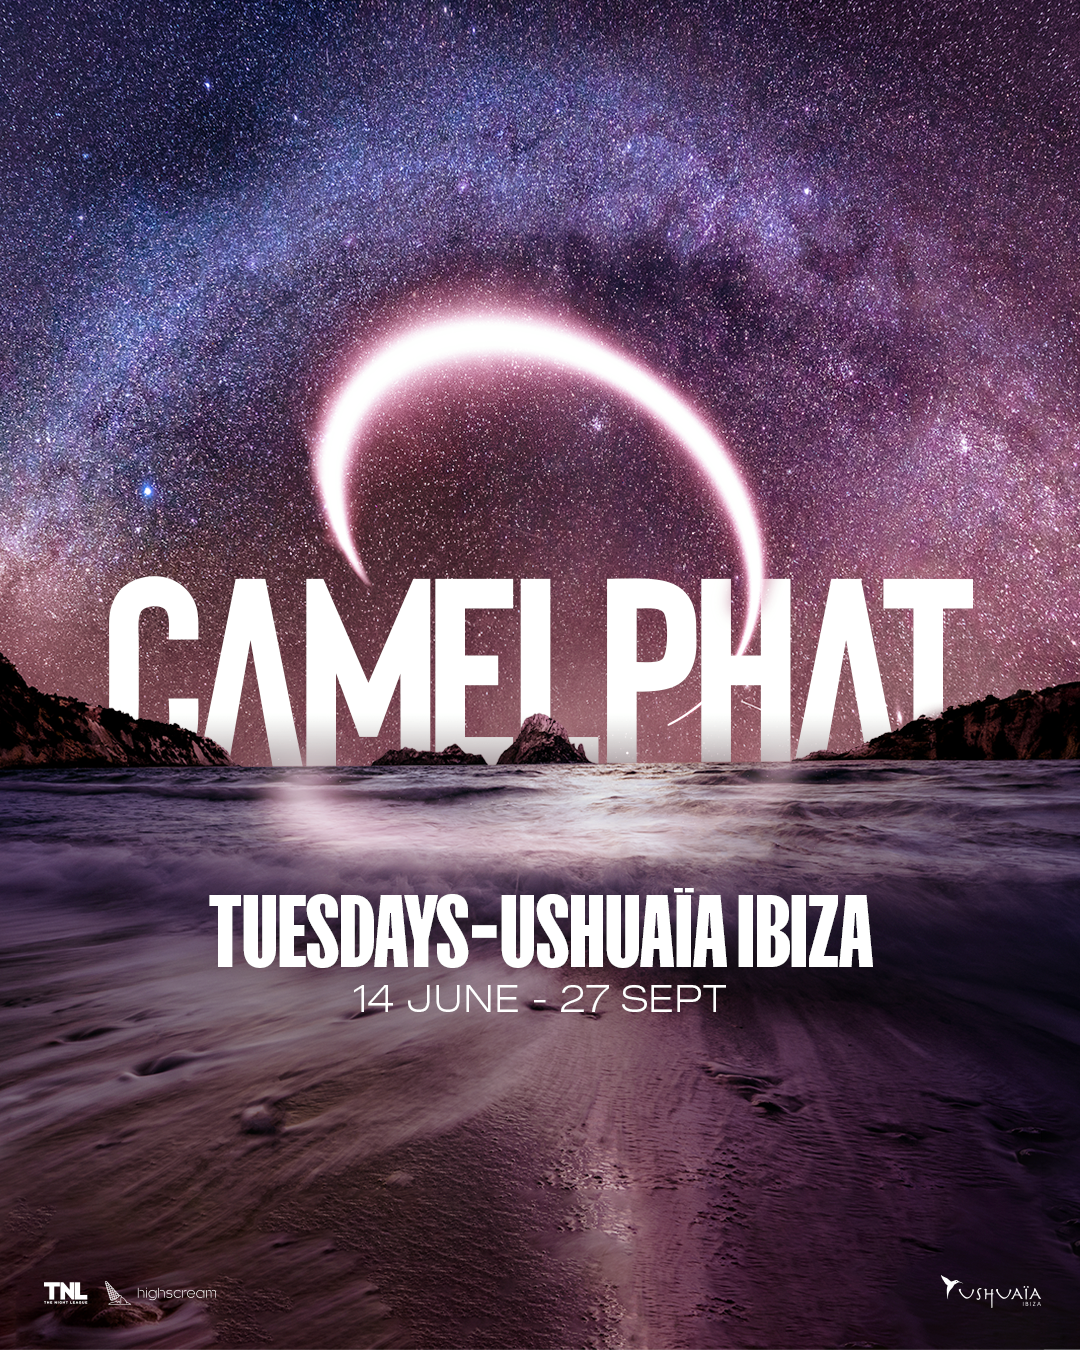 If you want to see CamelPhat this summer, it’s at Ushuaïa Ibiza!